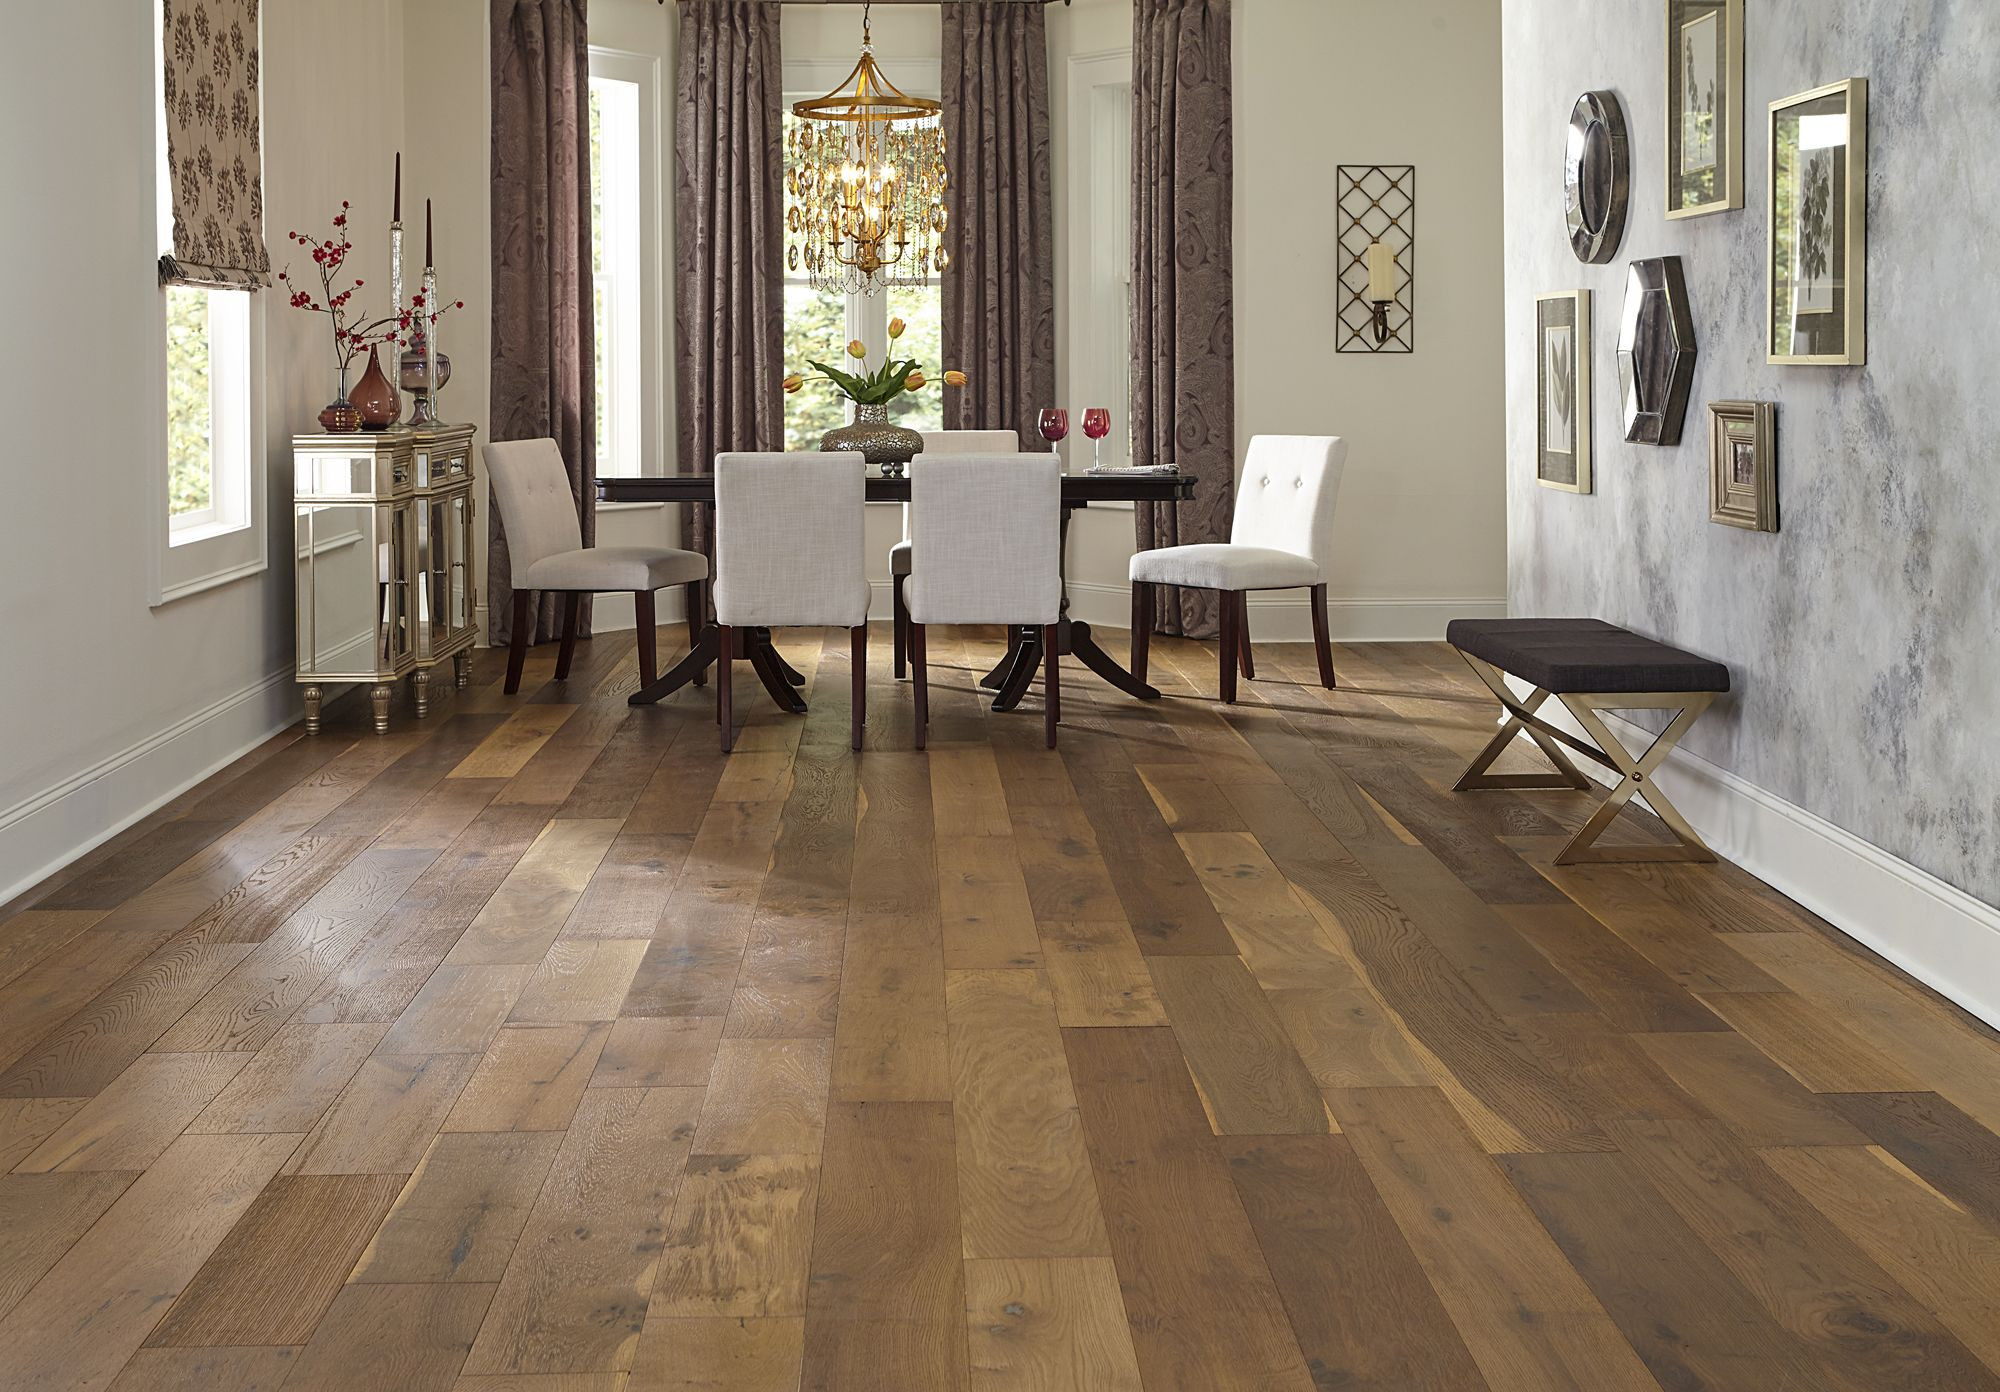 14 attractive Hardwood Floor Refinishing Price Per Sqft 2024 free download hardwood floor refinishing price per sqft of 7 1 2 wide planks and a rustic look bellawood willow manor oak has with 7 1 2 wide planks and a rustic look bellawood willow manor oak has a stor